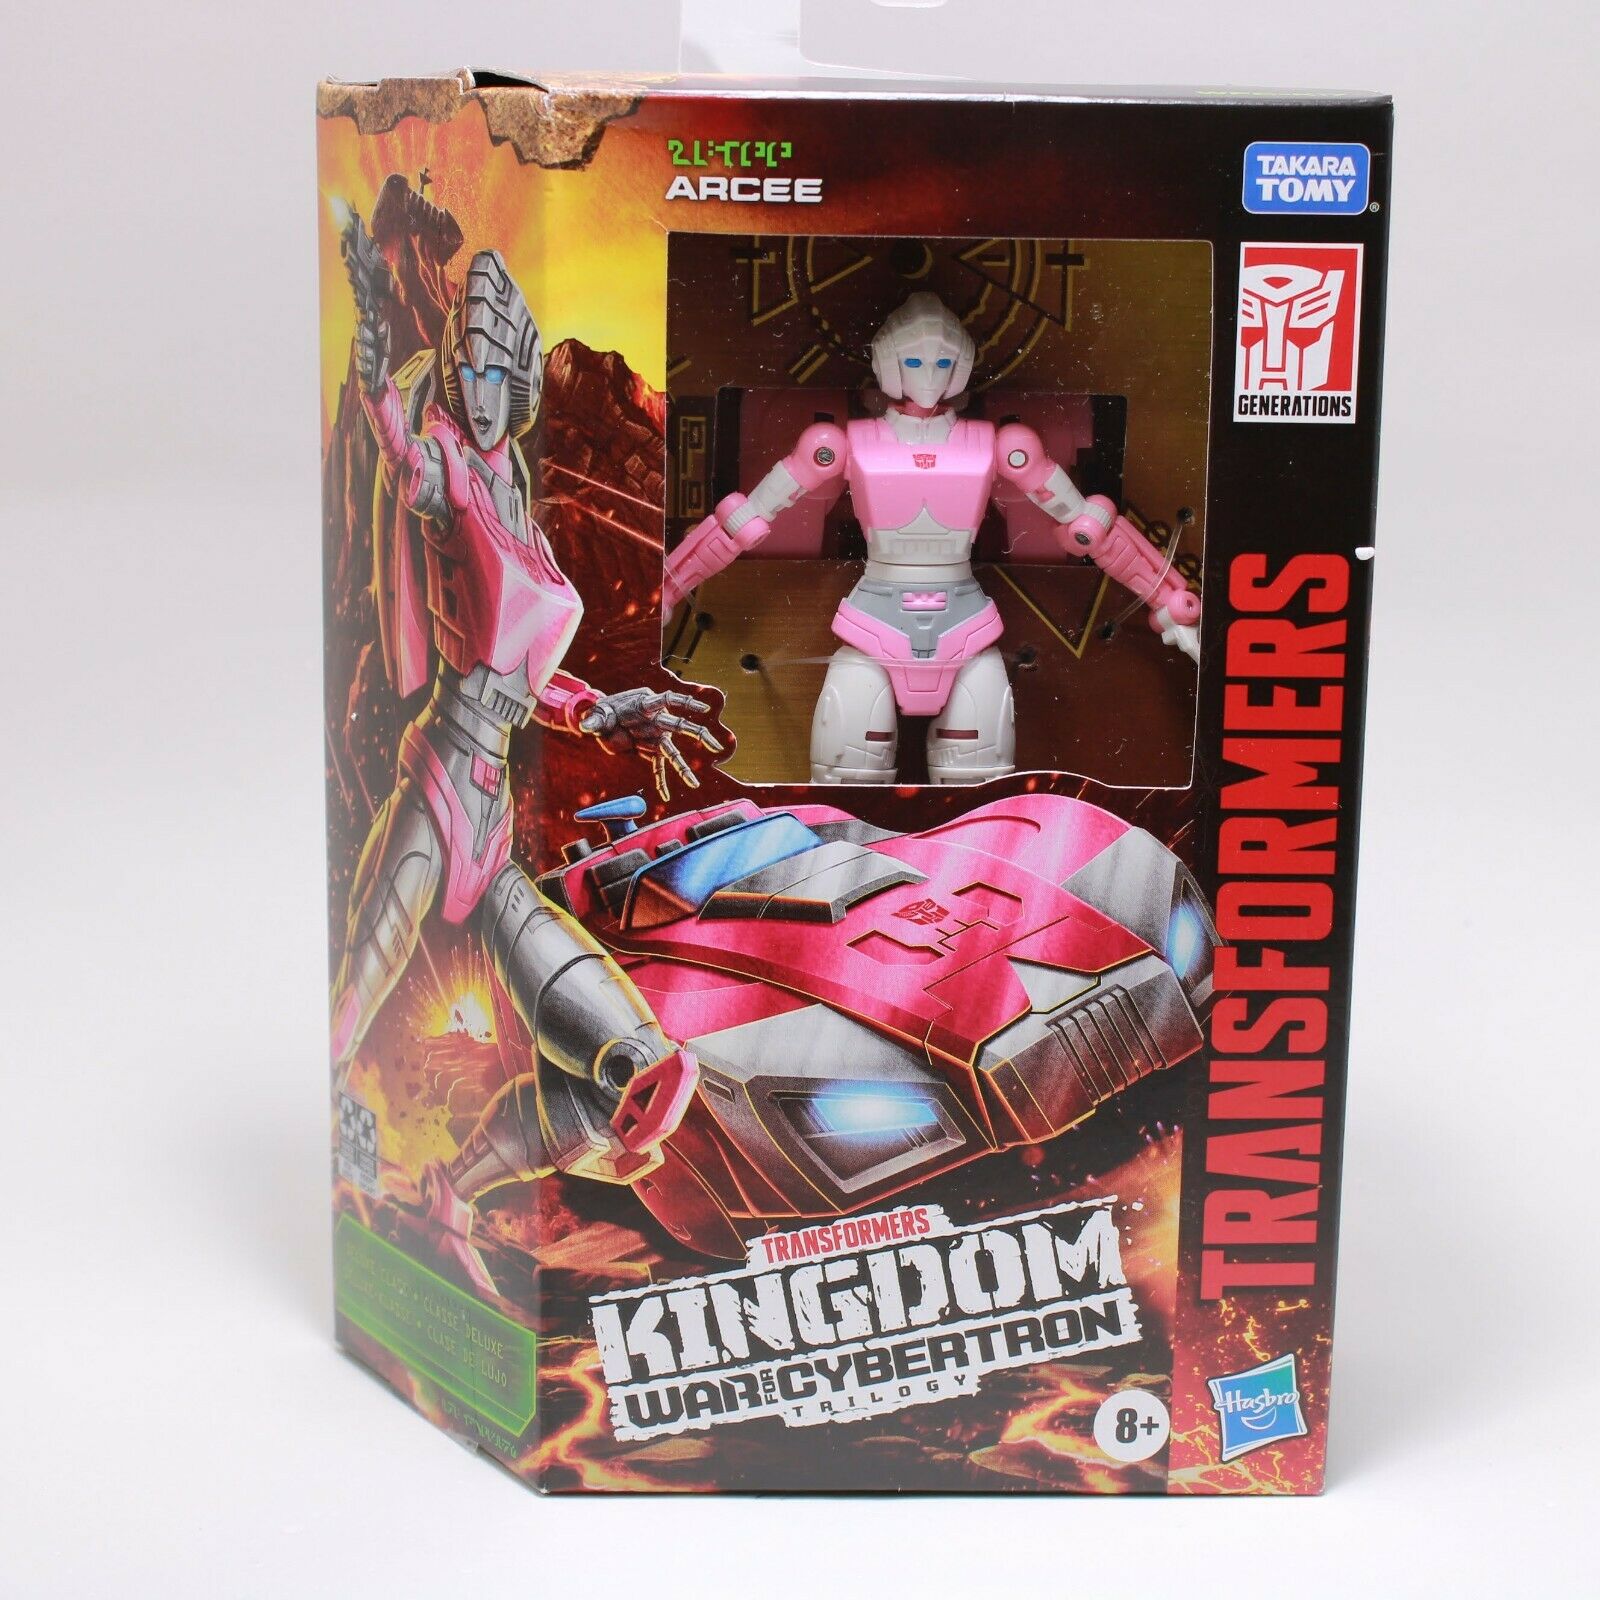 Transformers Kingdom Arcee - Deluxe Class Action Figure War for Cybertron